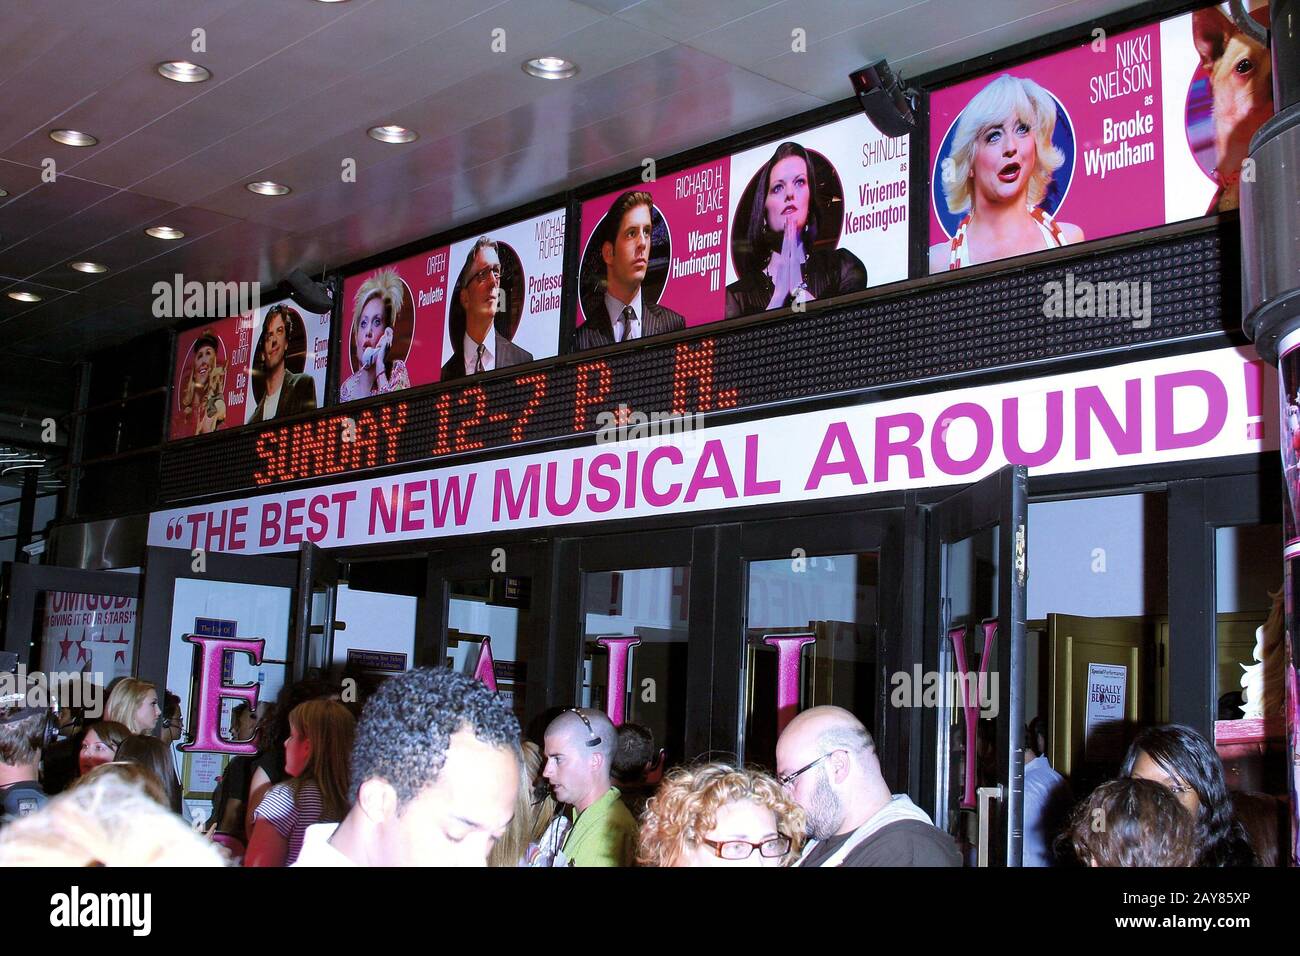 New York, NY, USA. 18 September, 2007. Atmosphere, exterior at the taping of Legally Blonde The Musical at The Palace Theatre. Credit: Steve Mack/Alamy Stock Photo